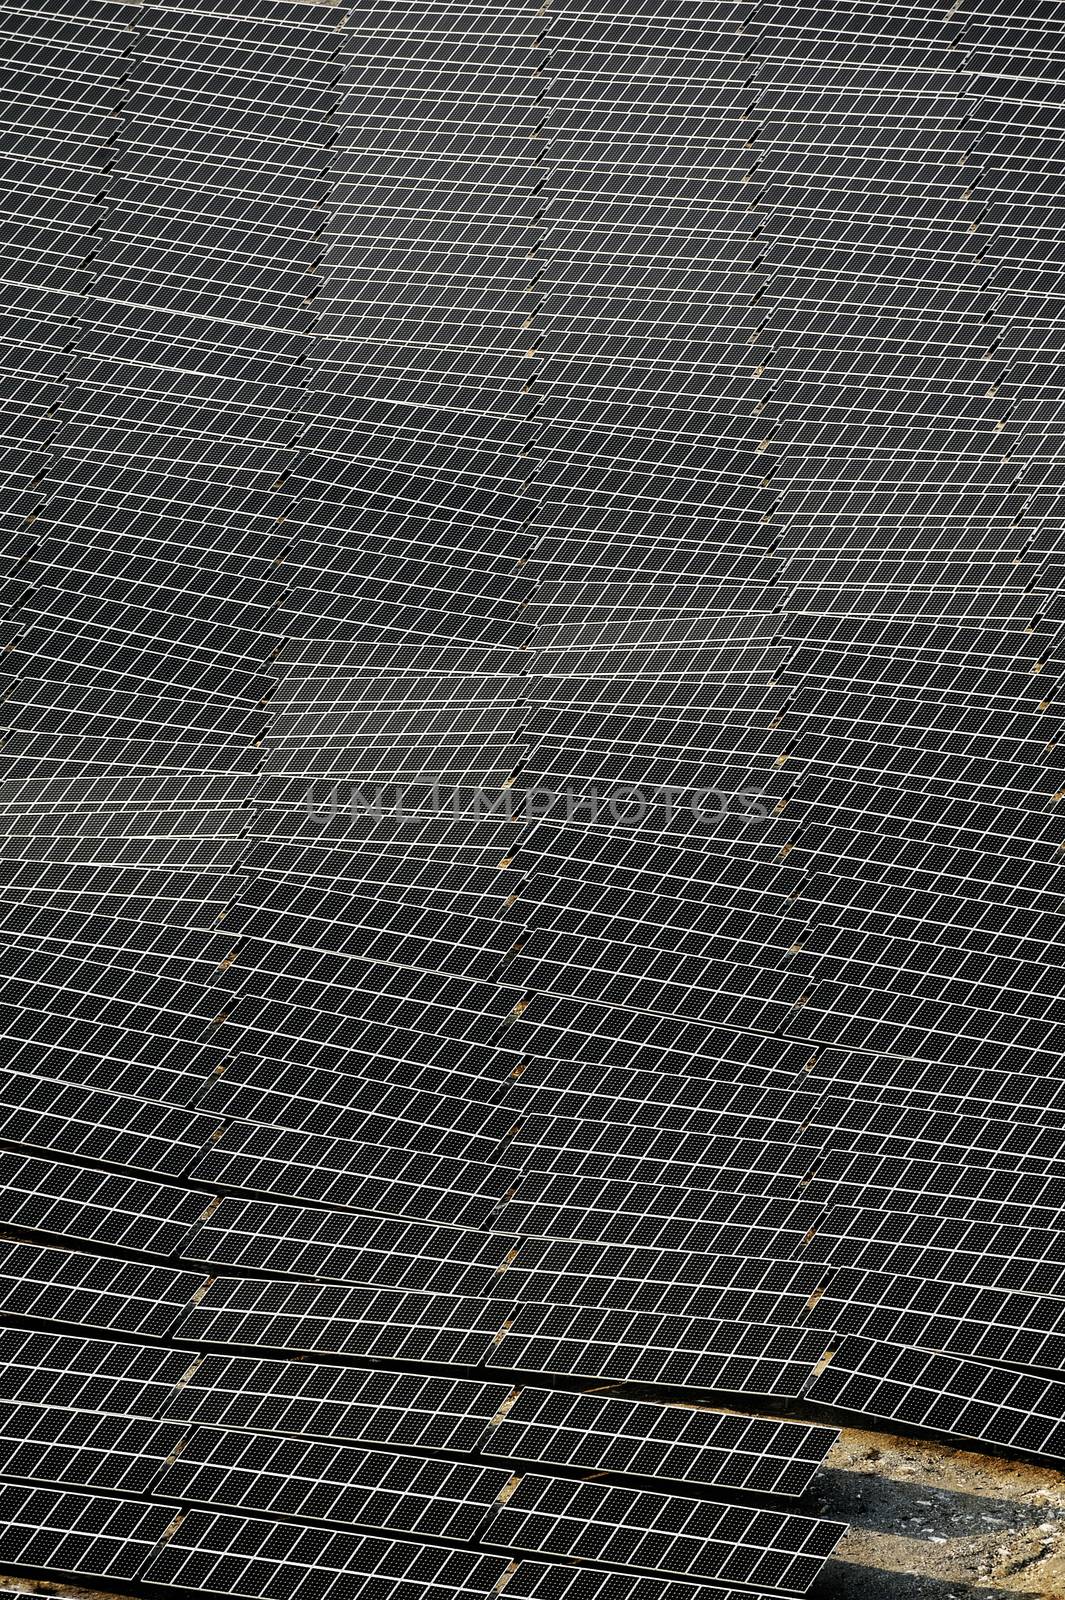 French photovoltaic solar plant by gillespaire